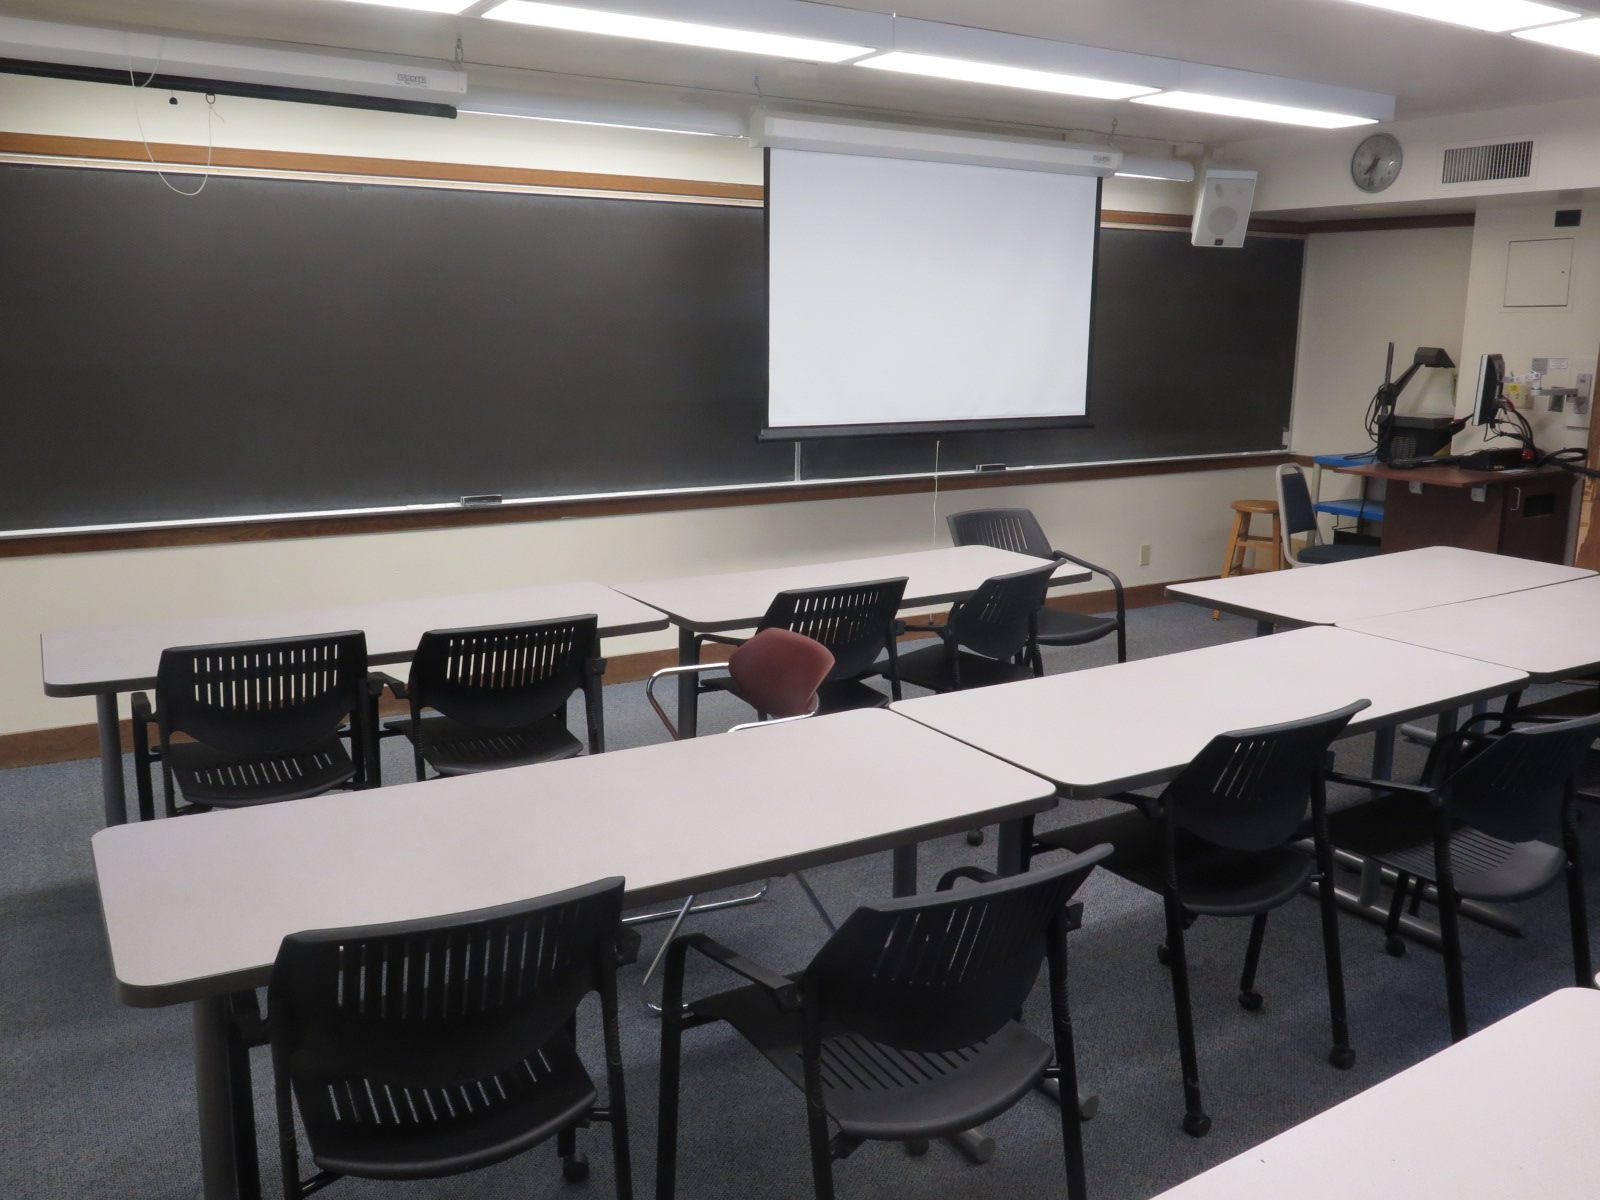 View of BH 151 from back of room, Moveable tables and chairs. Chalkboard on the front wall, podium at the front of room